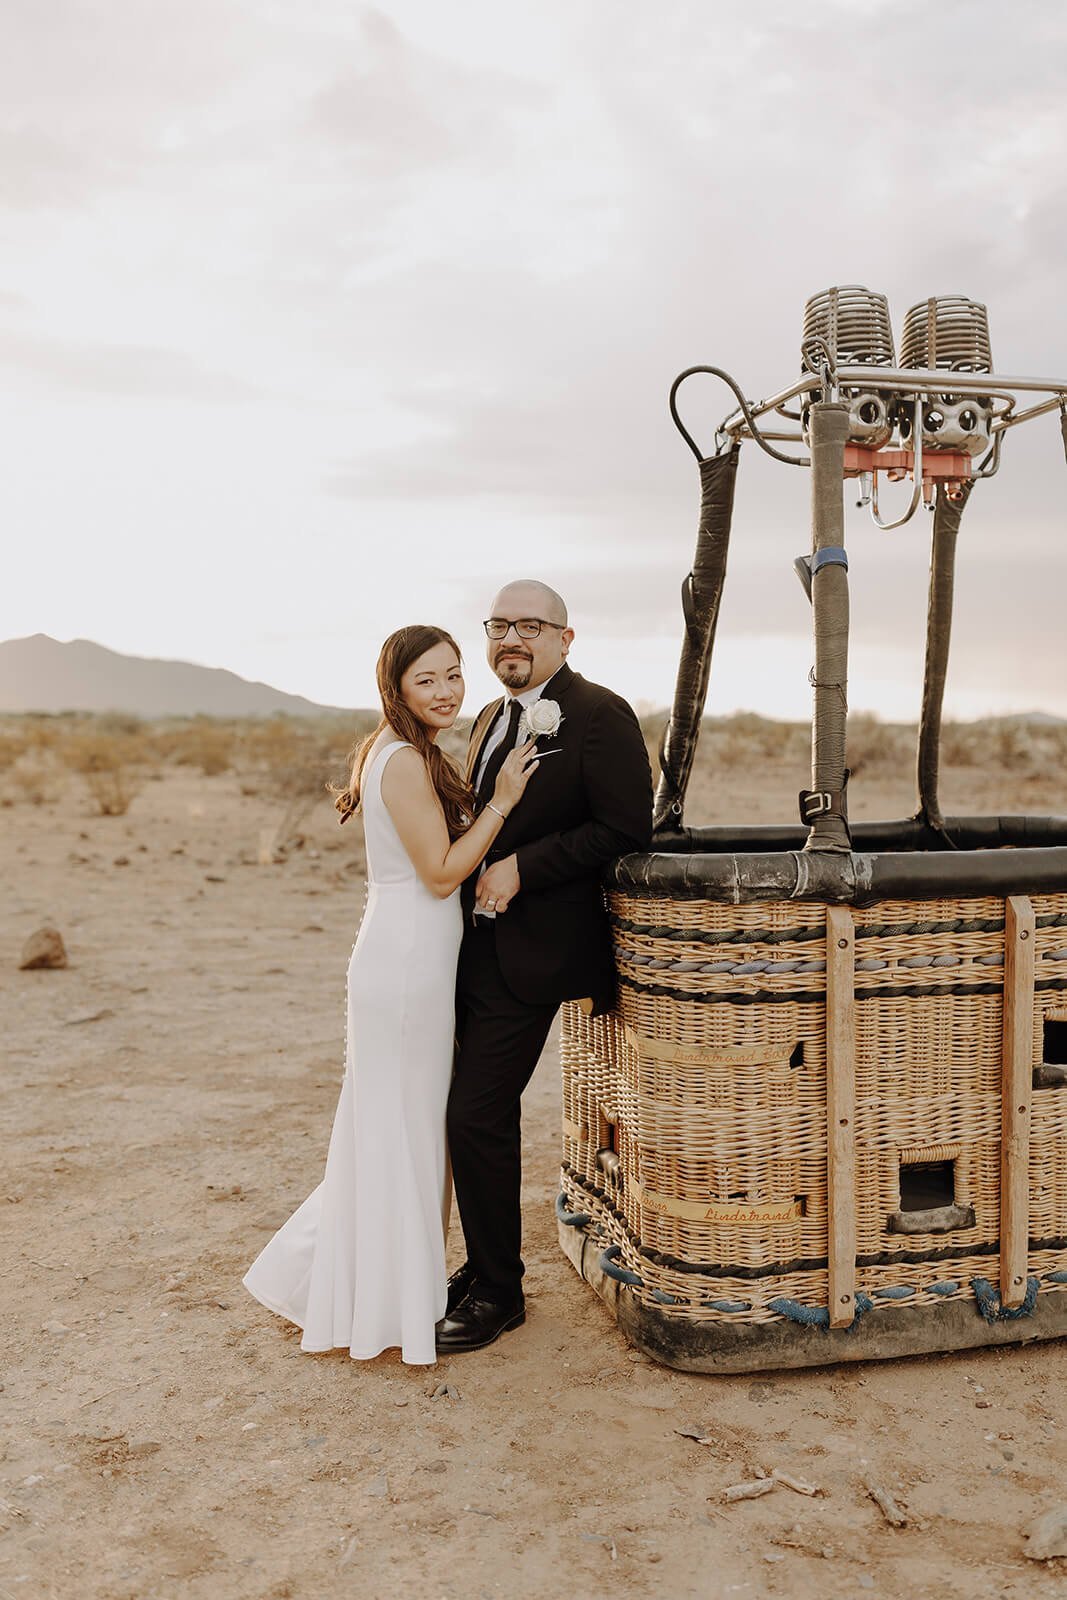 Bride and groom couple portraits inside a hot air balloon basket